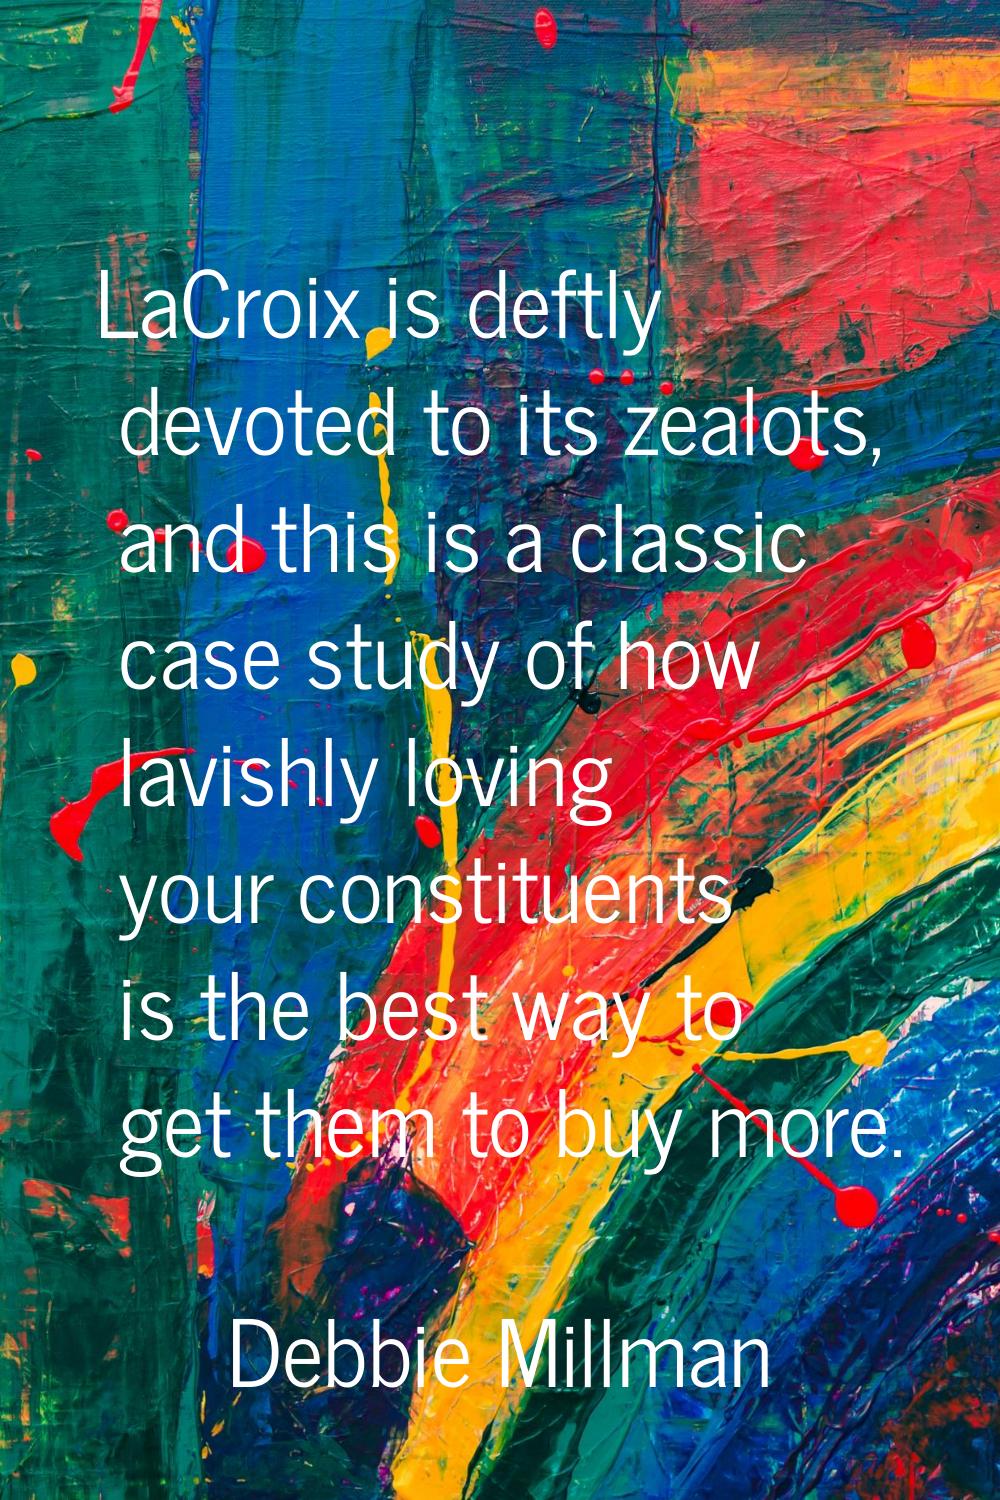 LaCroix is deftly devoted to its zealots, and this is a classic case study of how lavishly loving y